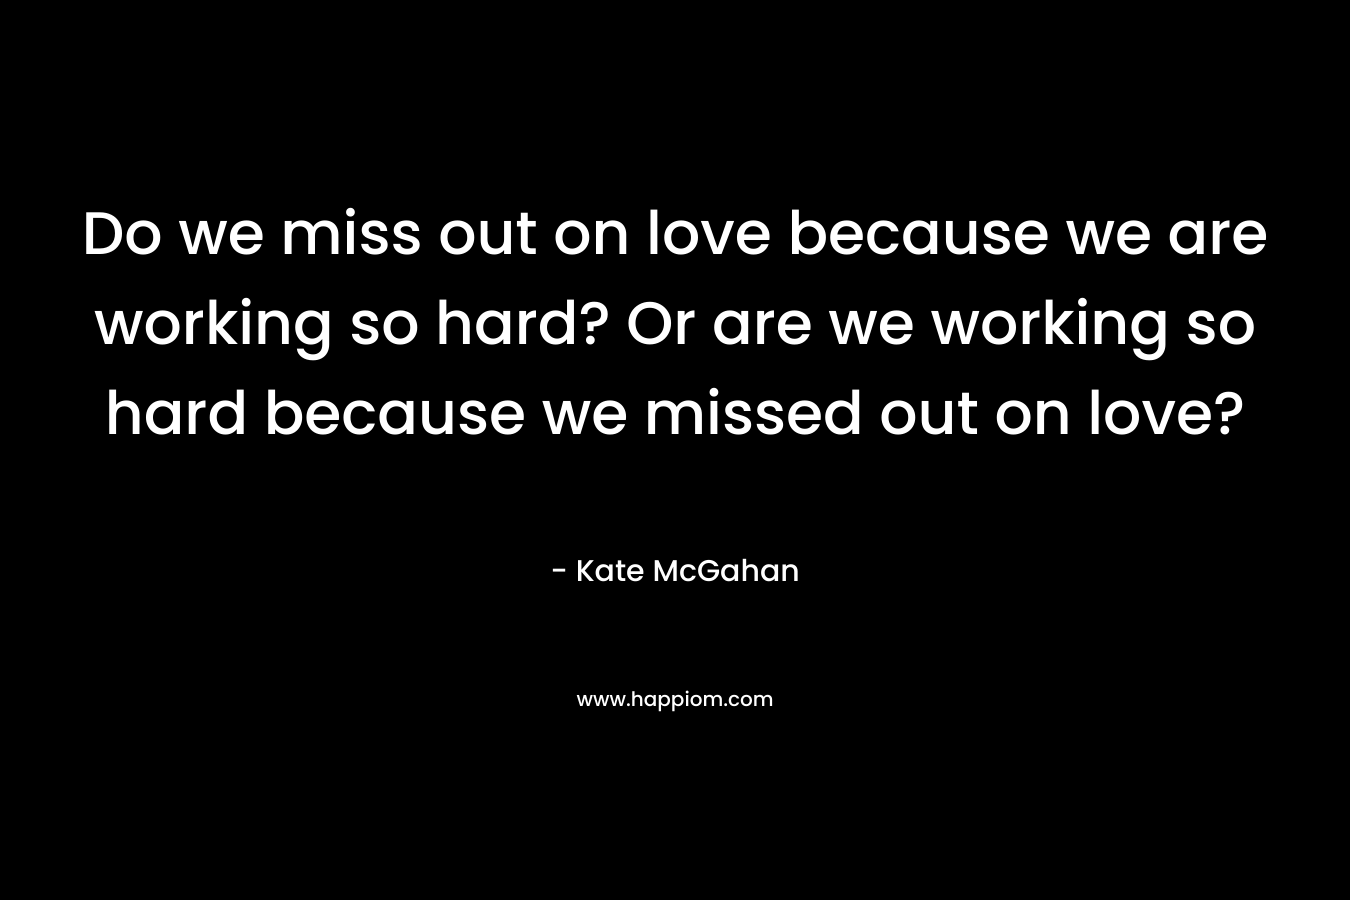 Do we miss out on love because we are working so hard? Or are we working so hard because we missed out on love?